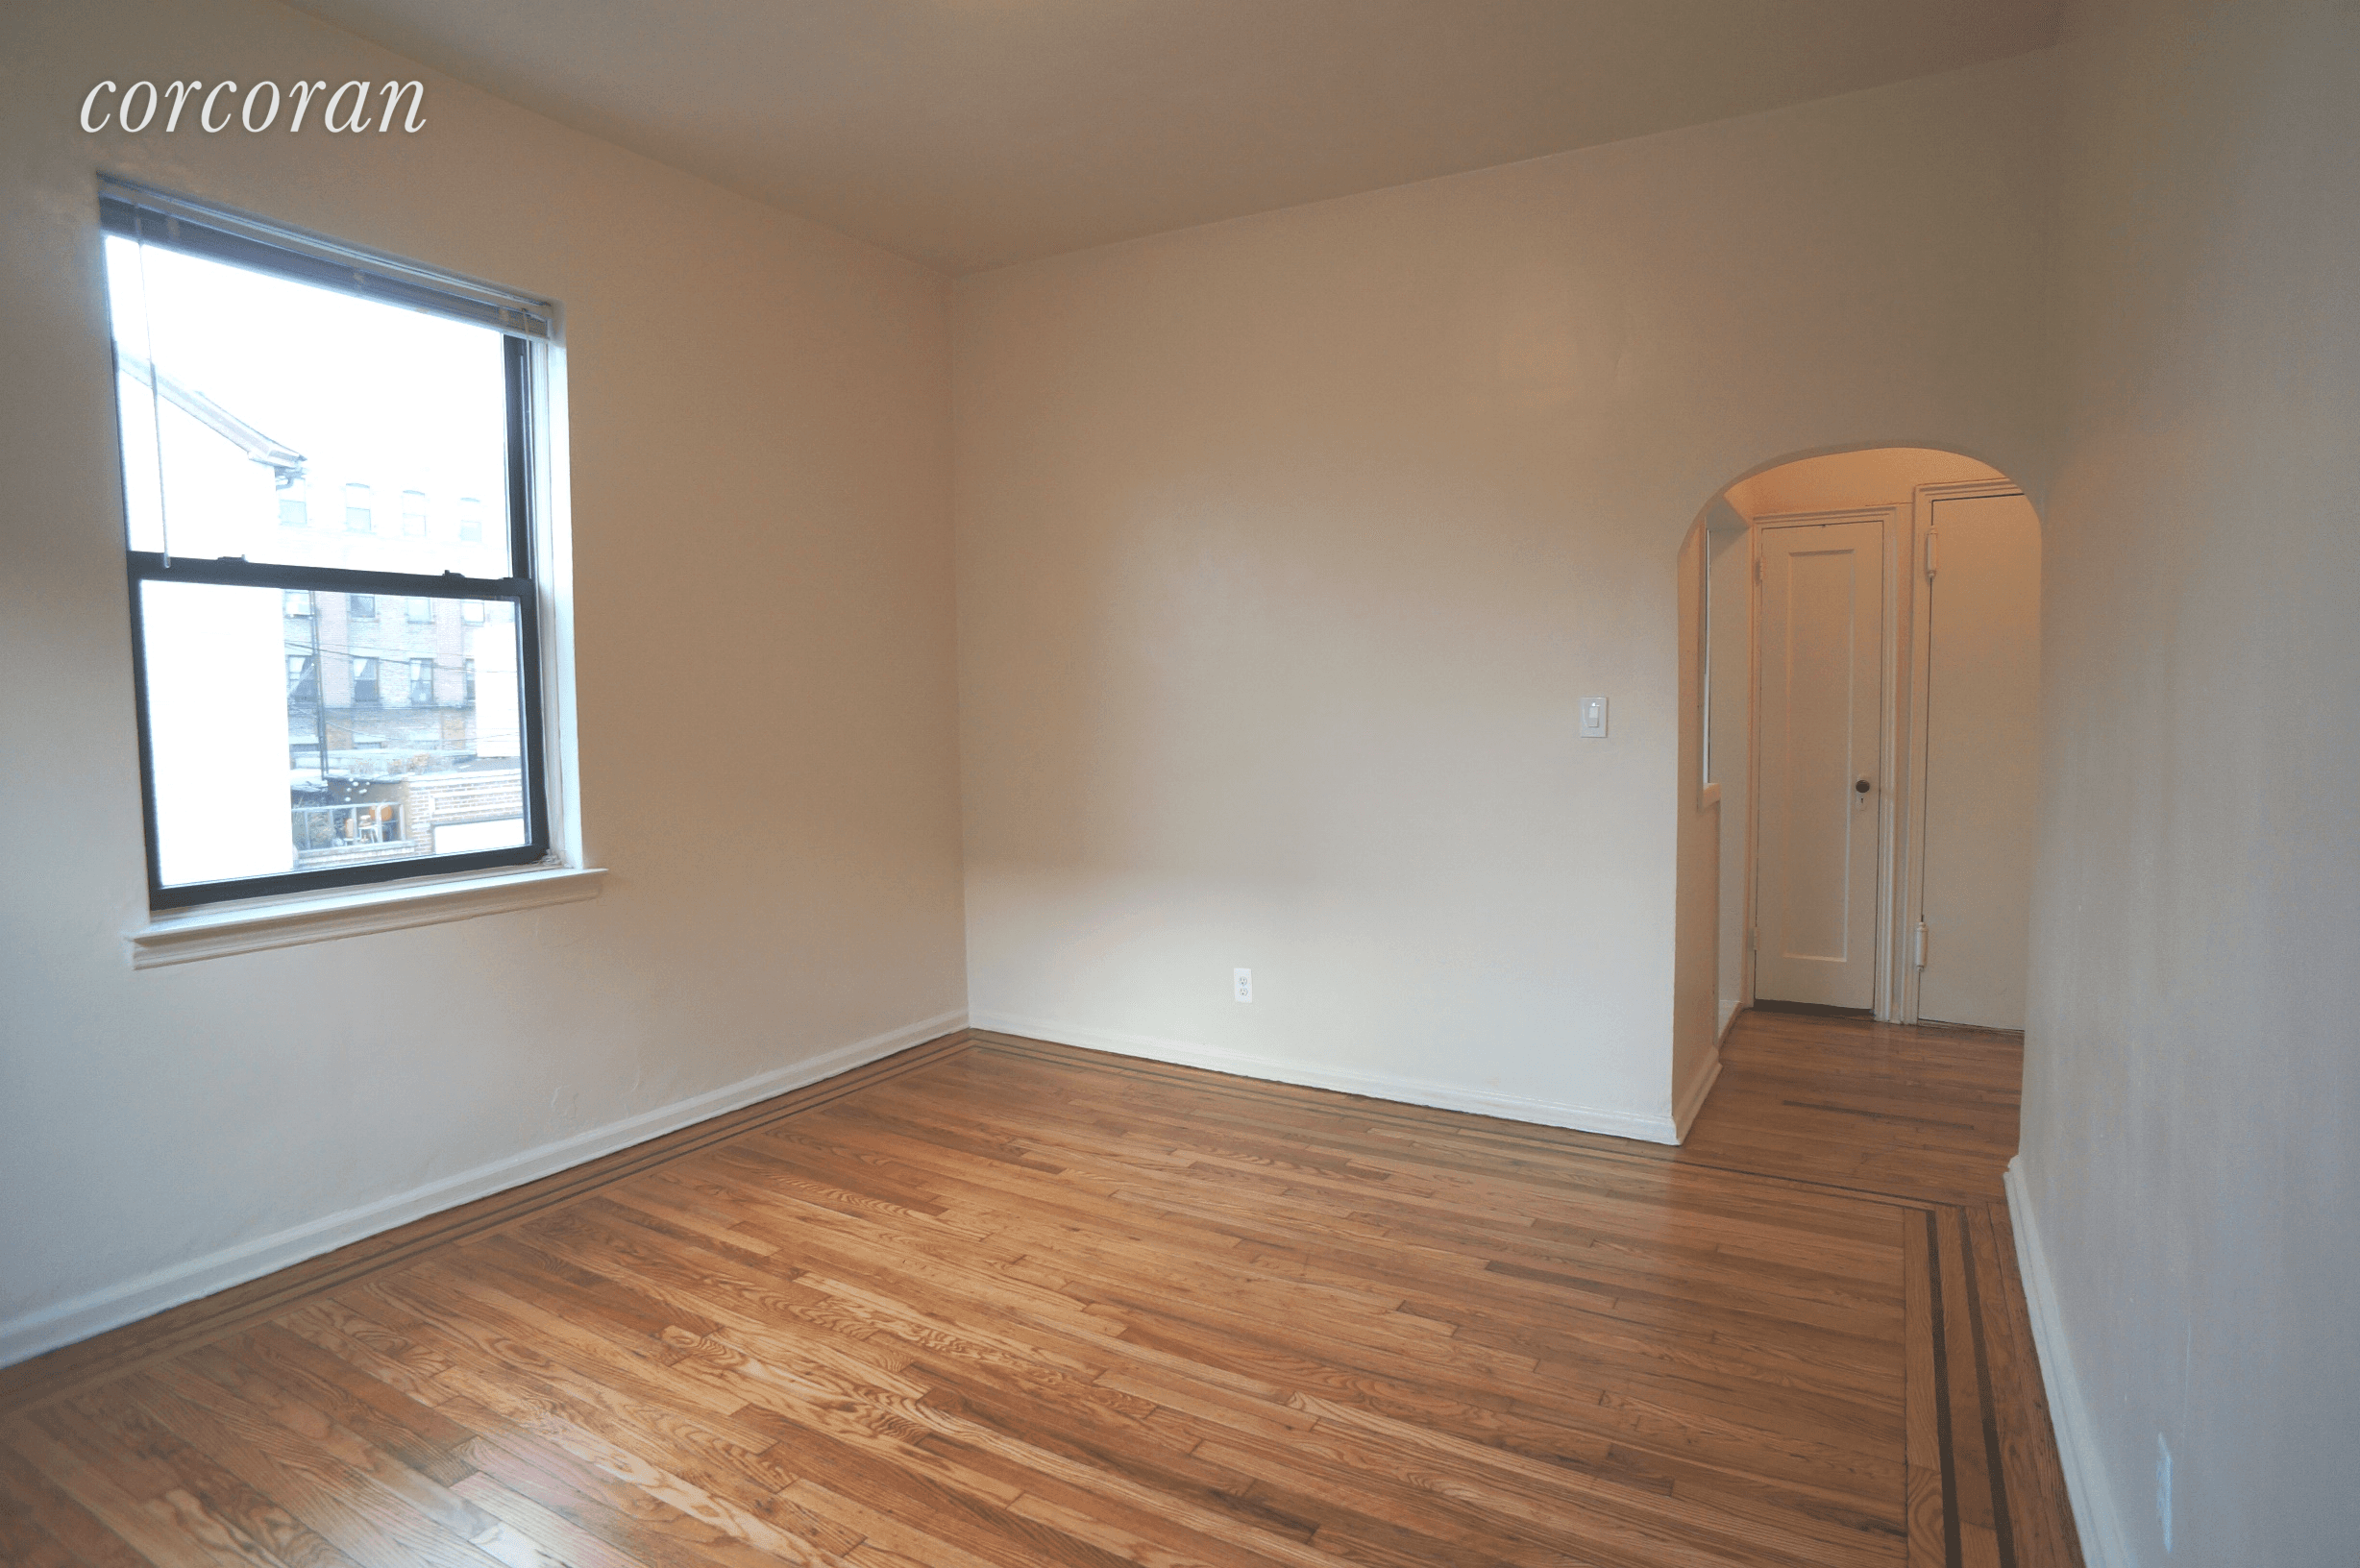 Absolutely adorable Williamsburg 1 bedroom apartment nestled on the corner of tree lined Manhattan Ave and Devoe Street.